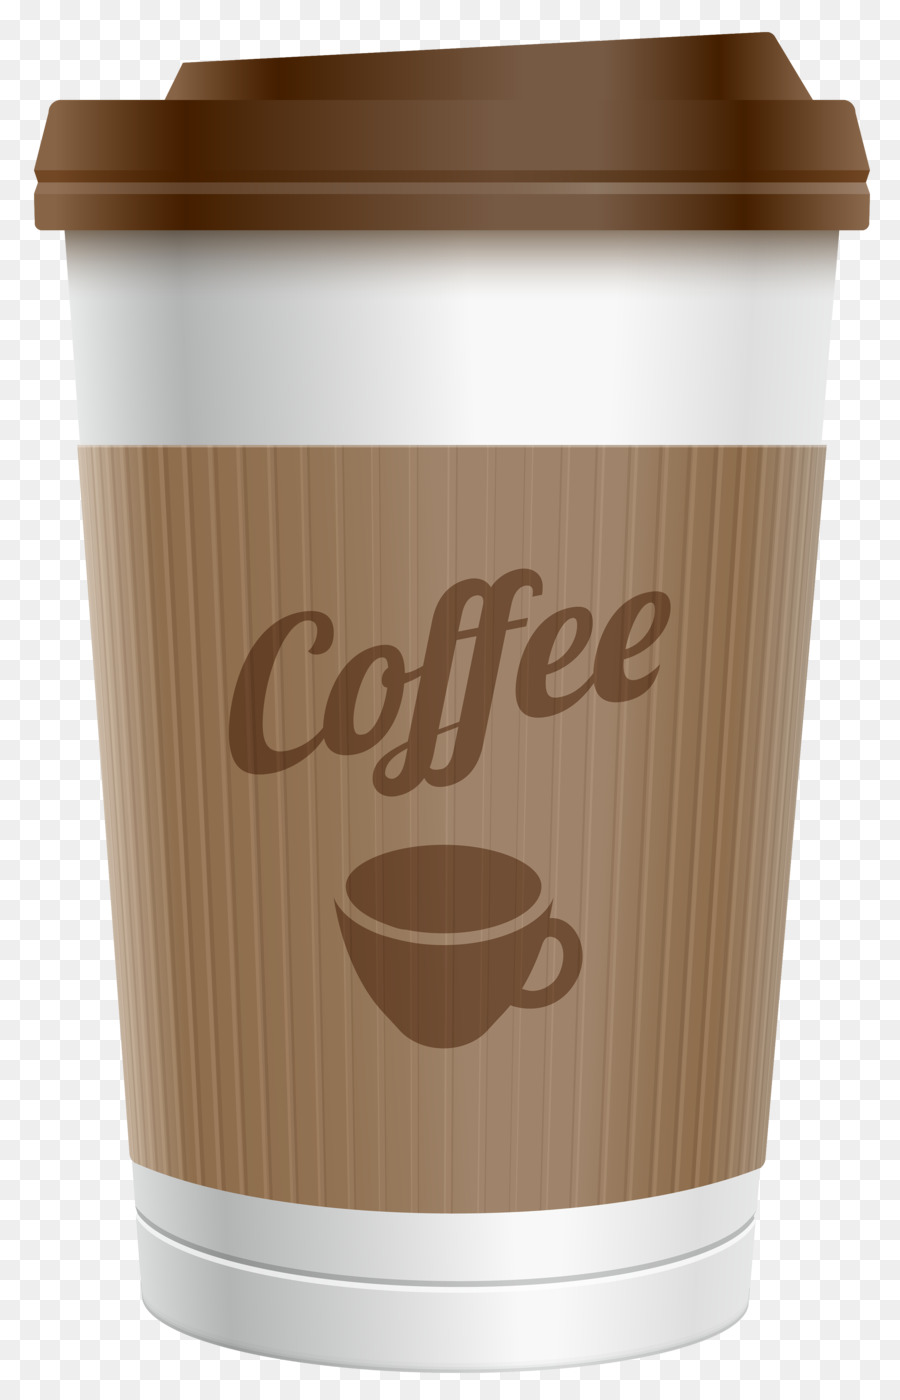 Coffee cup Tea Clip art - Coffee Cup PNG HD png download - 2692*4180 - Free Transparent Coffee png Download.